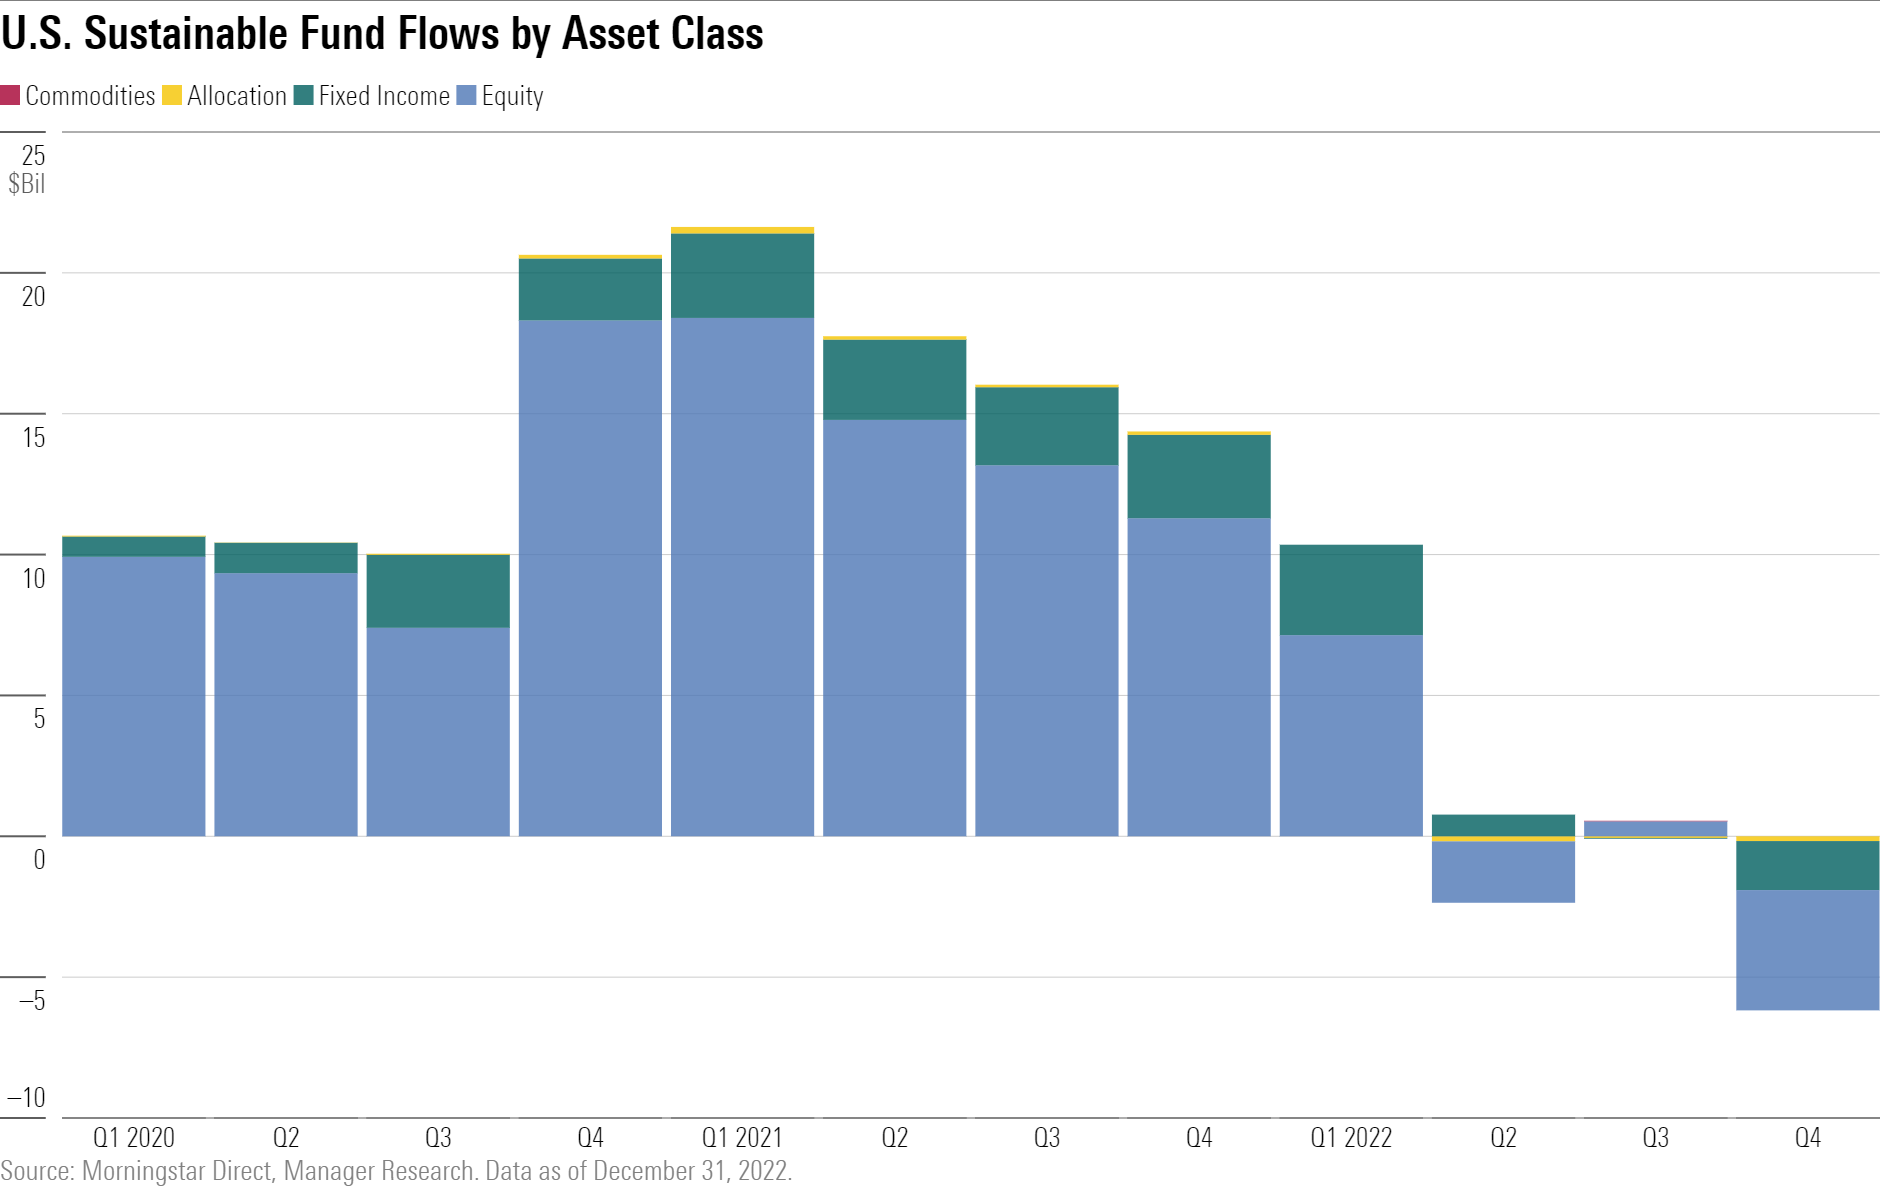 Bar chart showing flows into sustainable funds by asset class